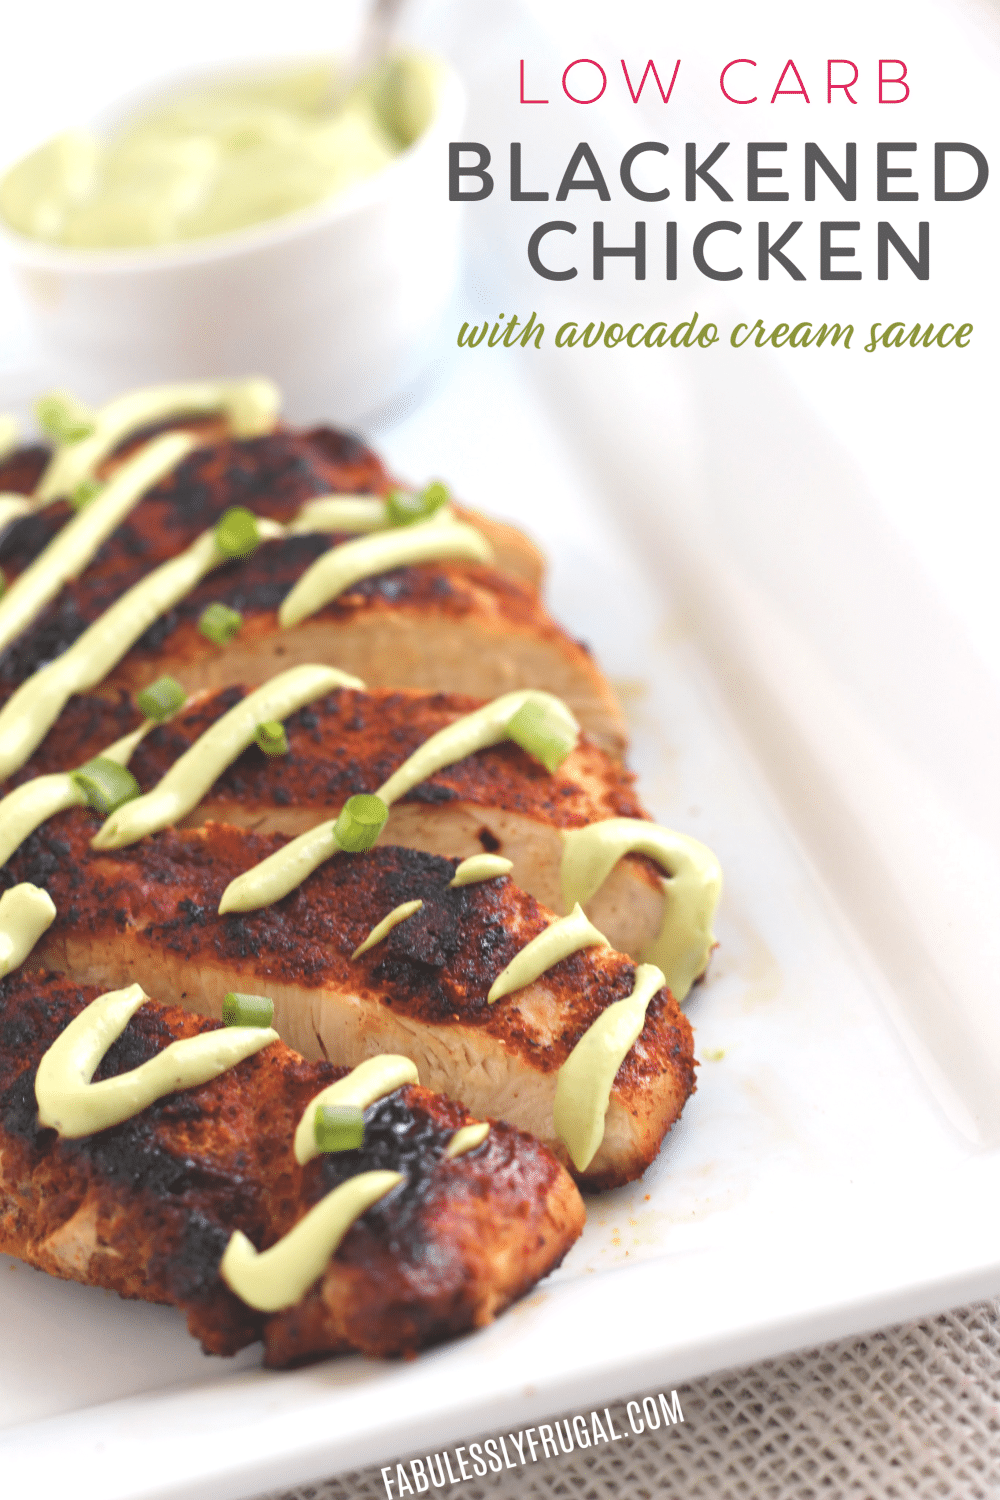 Low Carb Blackened Chicken with Avocado Cream Sauce